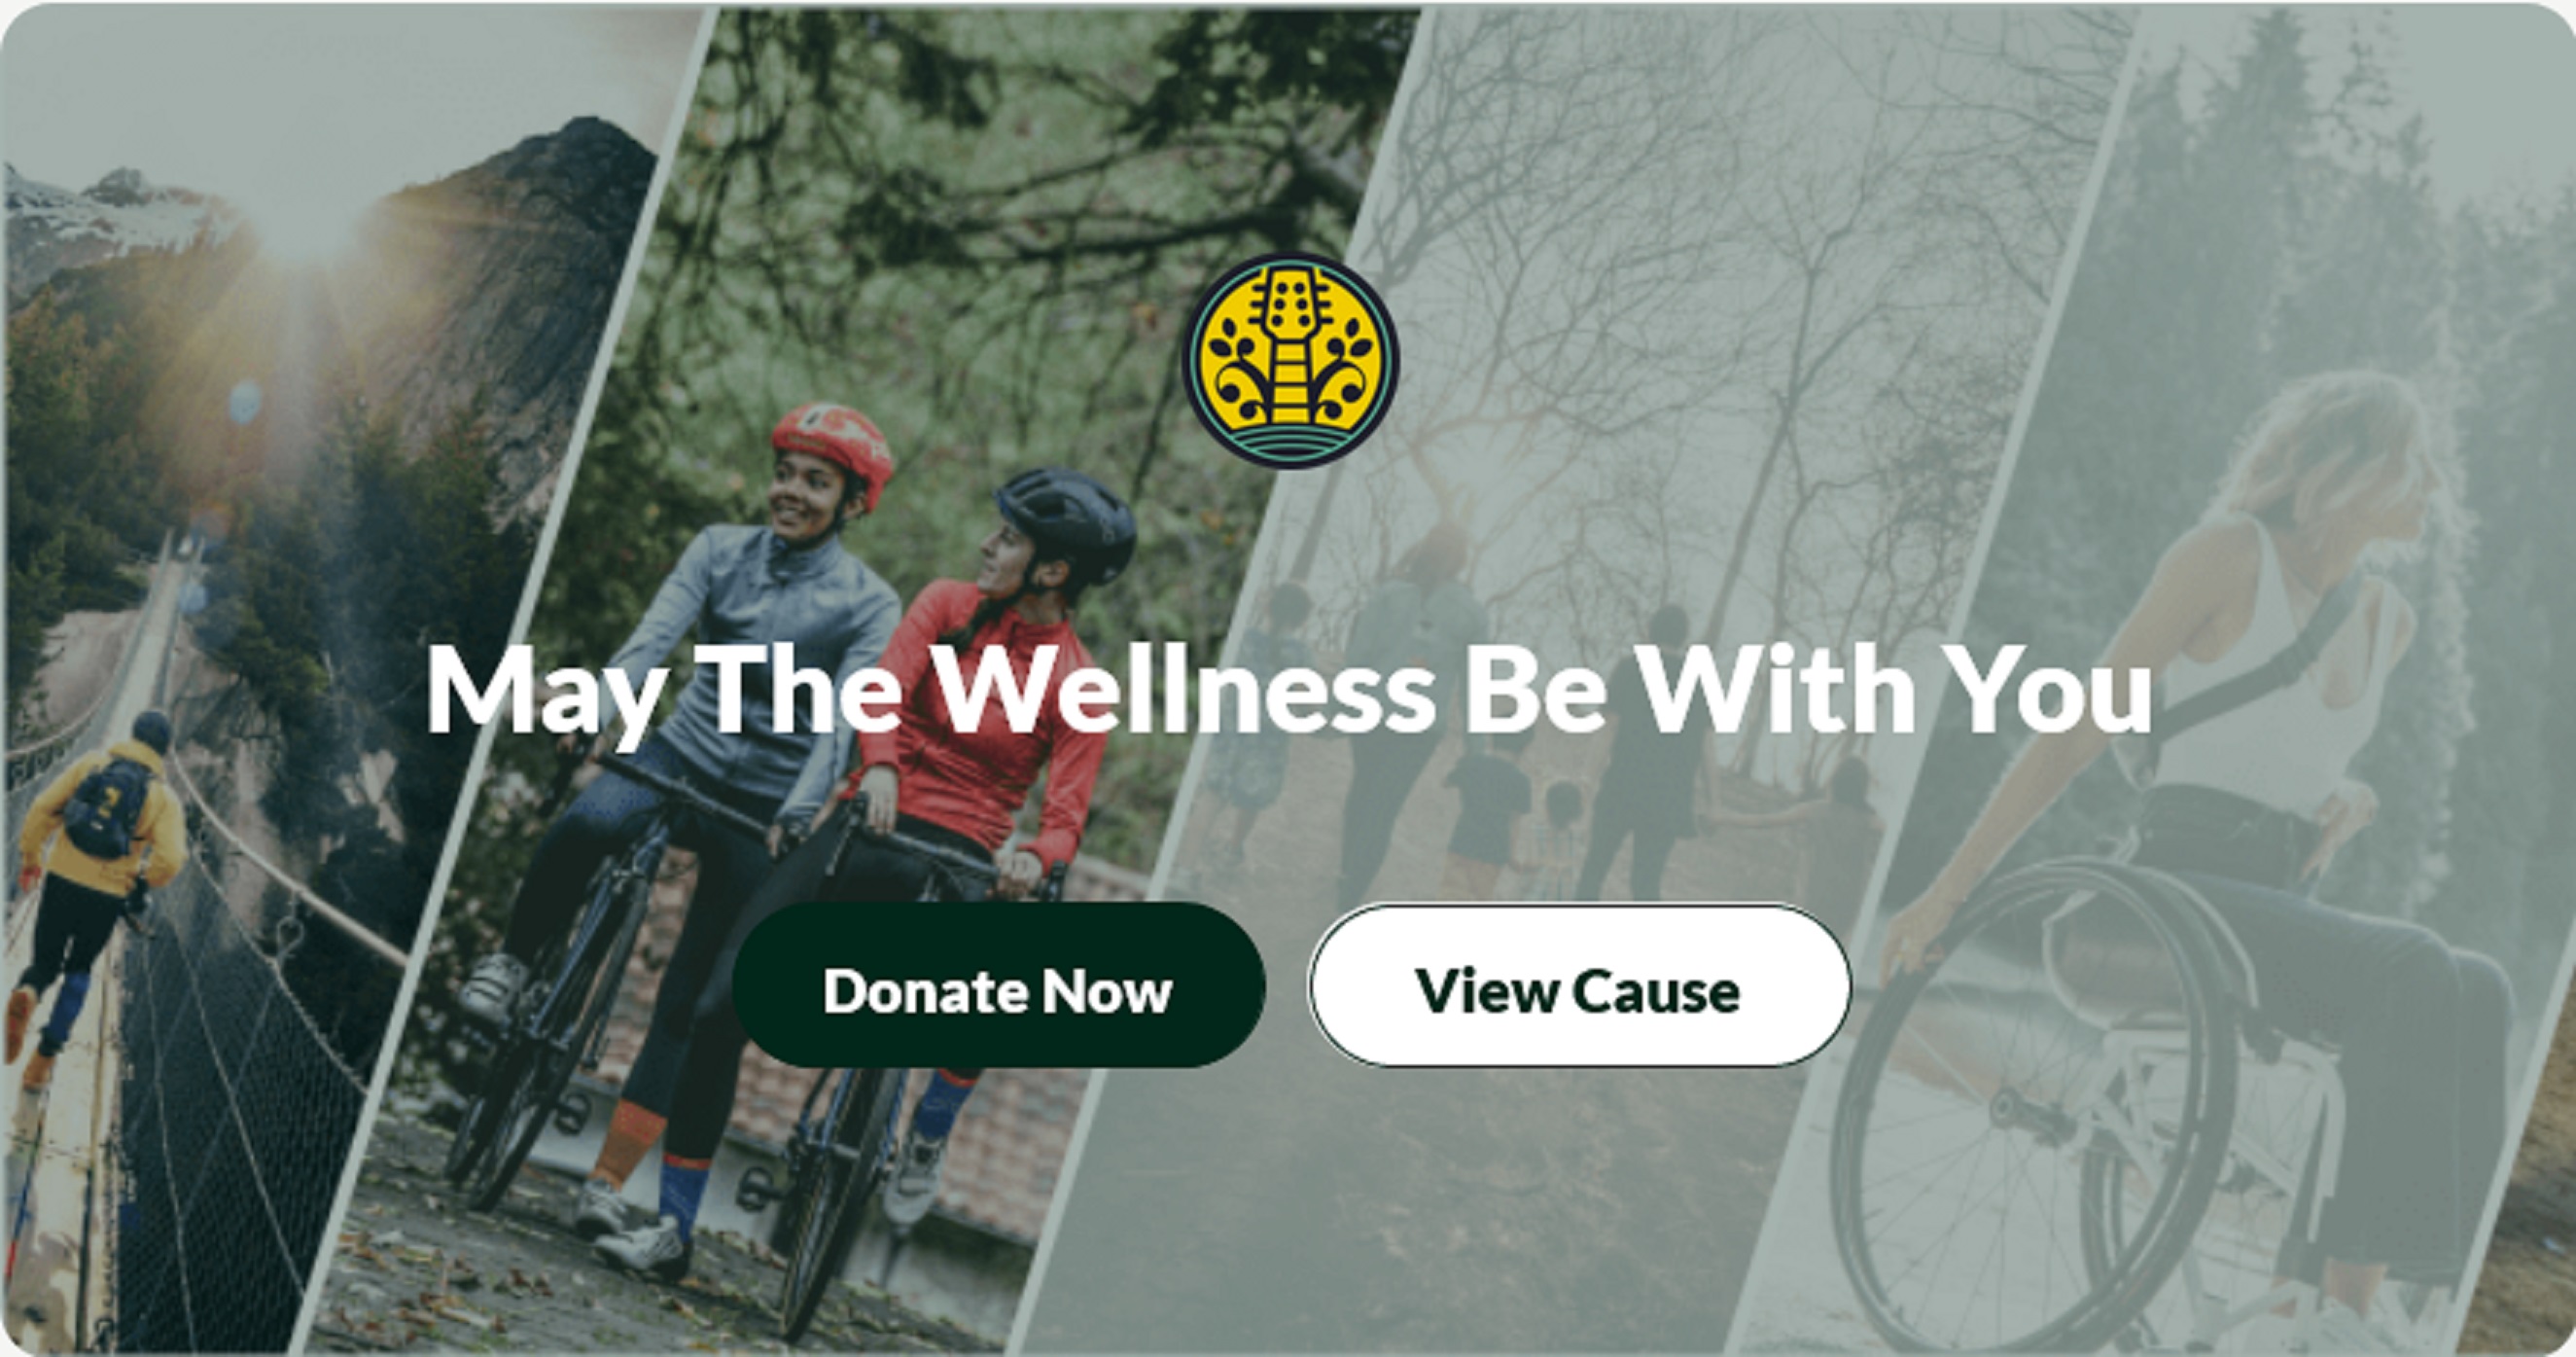 May the Wellness Be With You wellness challenge to benefit Backline and Positive Legacy